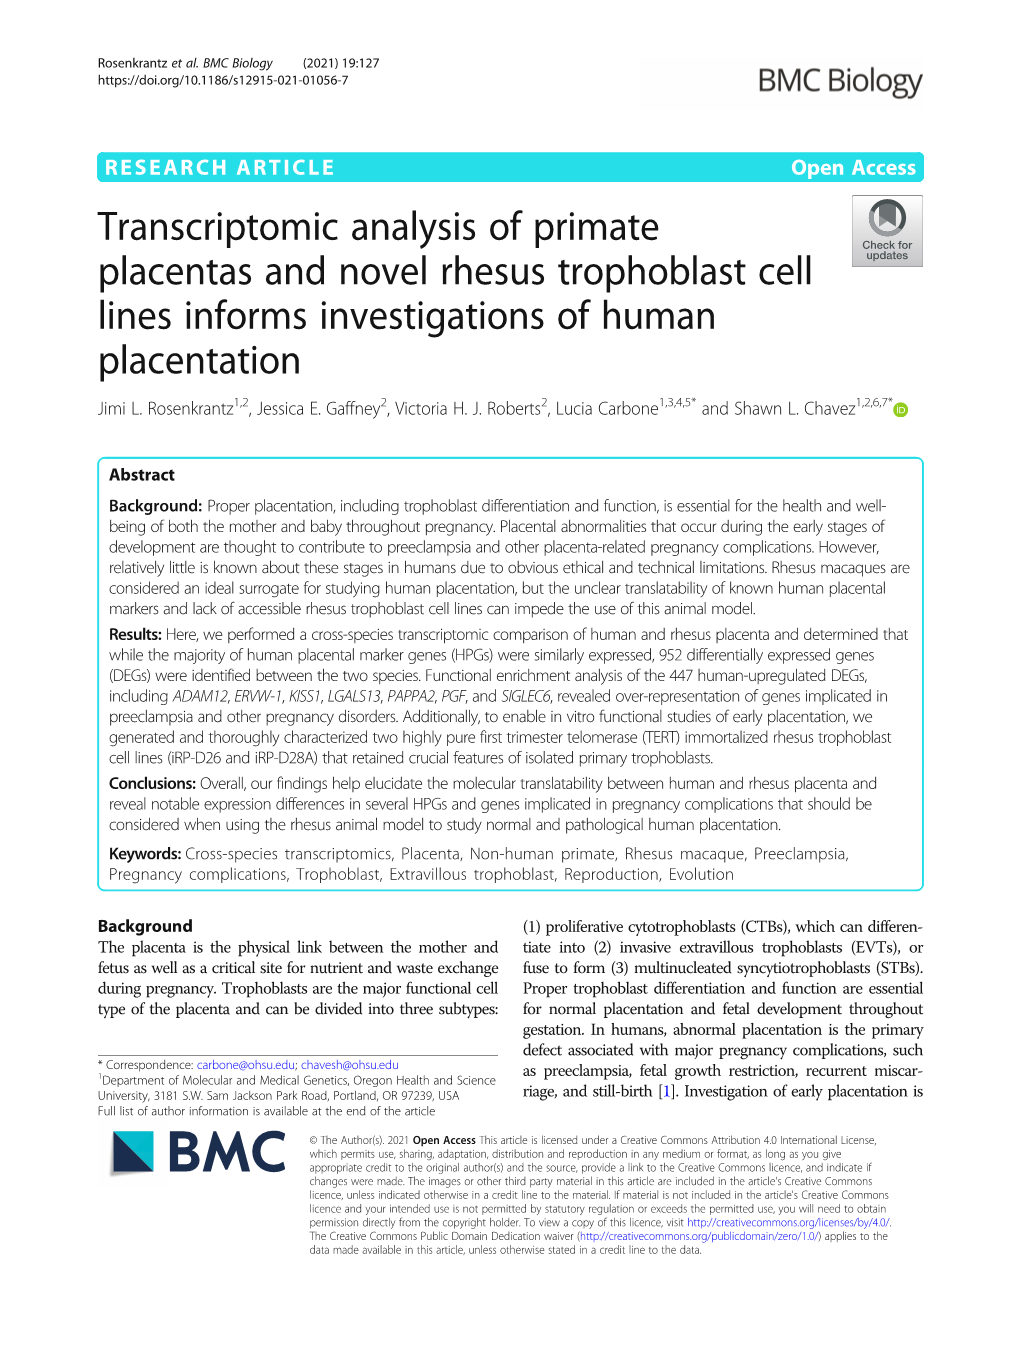 Transcriptomic Analysis of Primate Placentas and Novel Rhesus Trophoblast Cell Lines Informs Investigations of Human Placentation Jimi L